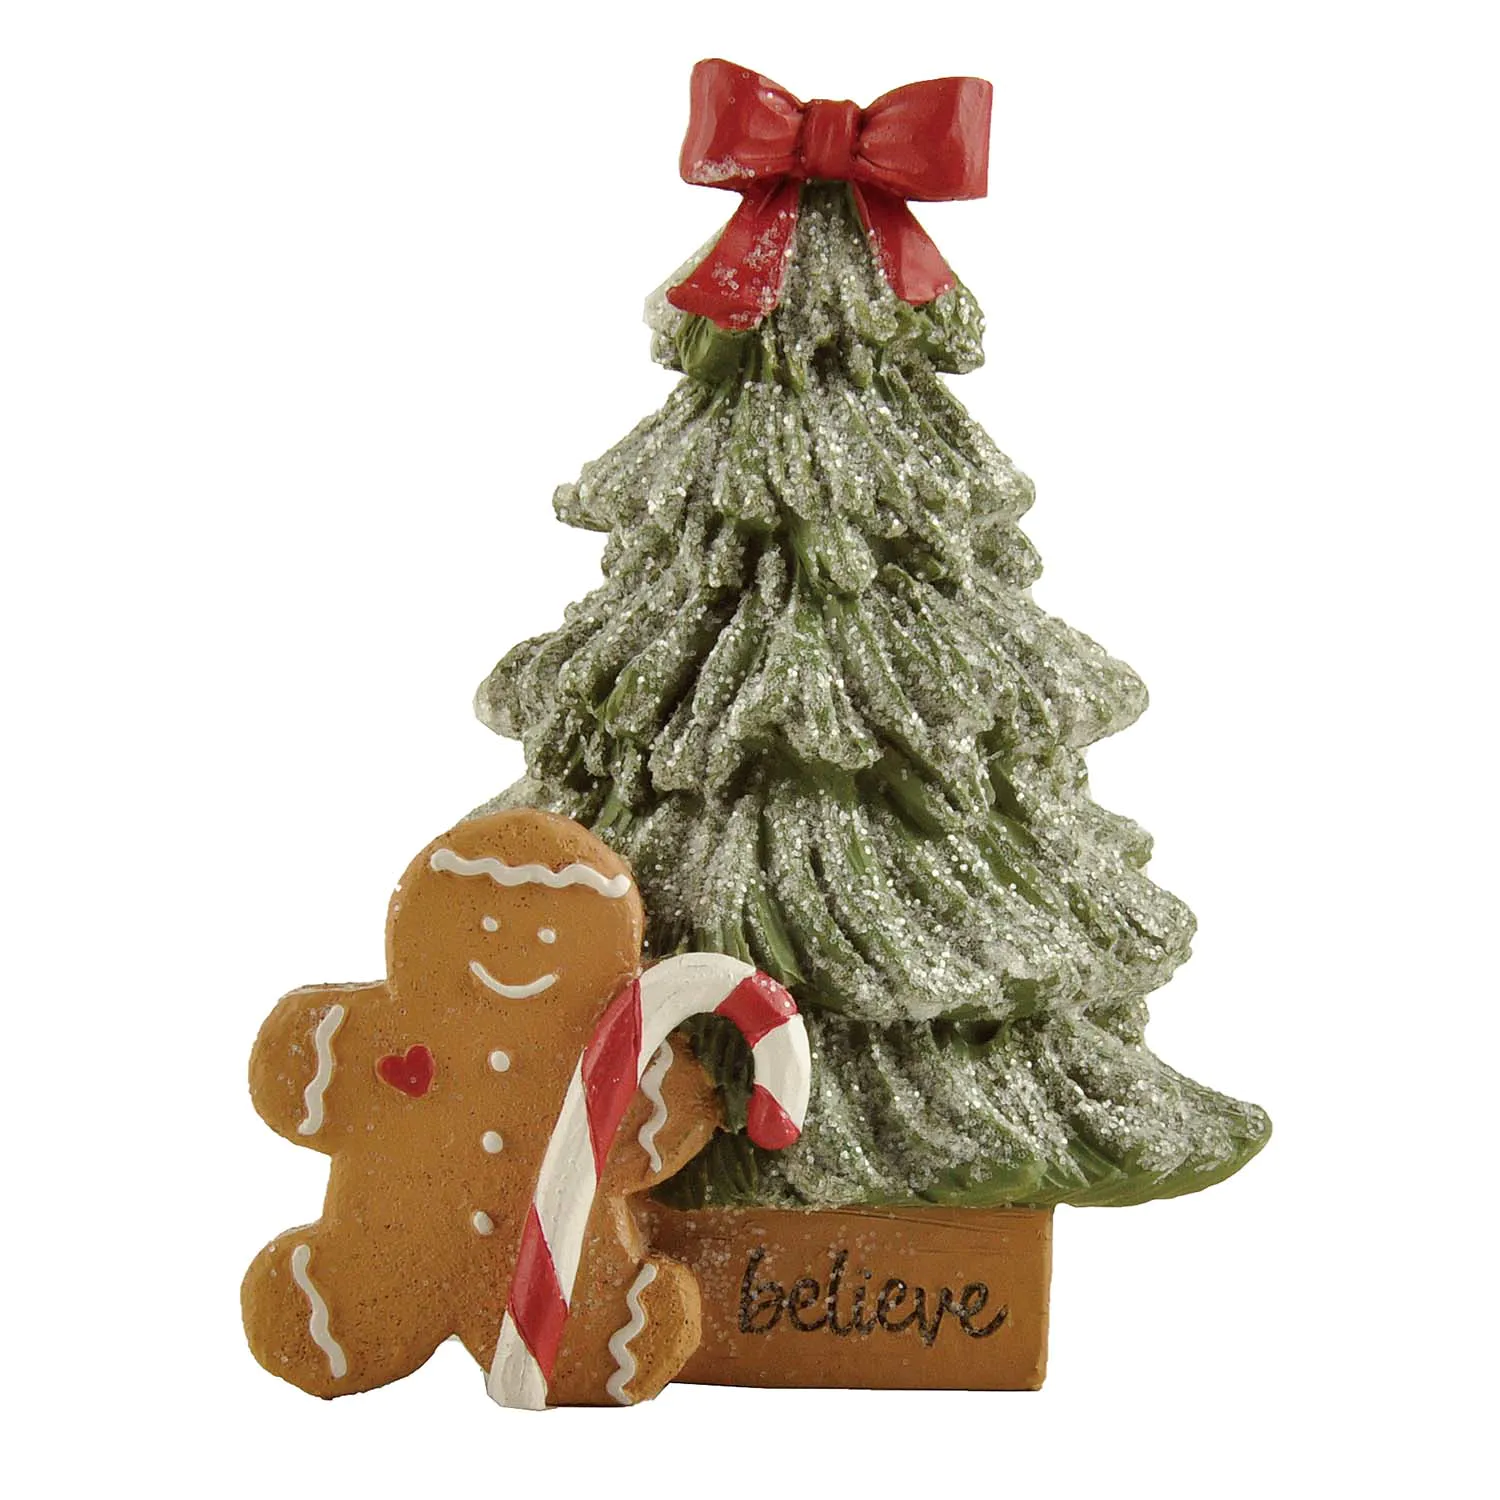 Factory Handmade Resin Christmas Crafts Gingerbread Man w Christmas Tree & Candy Cane for Home Decor 238-13743